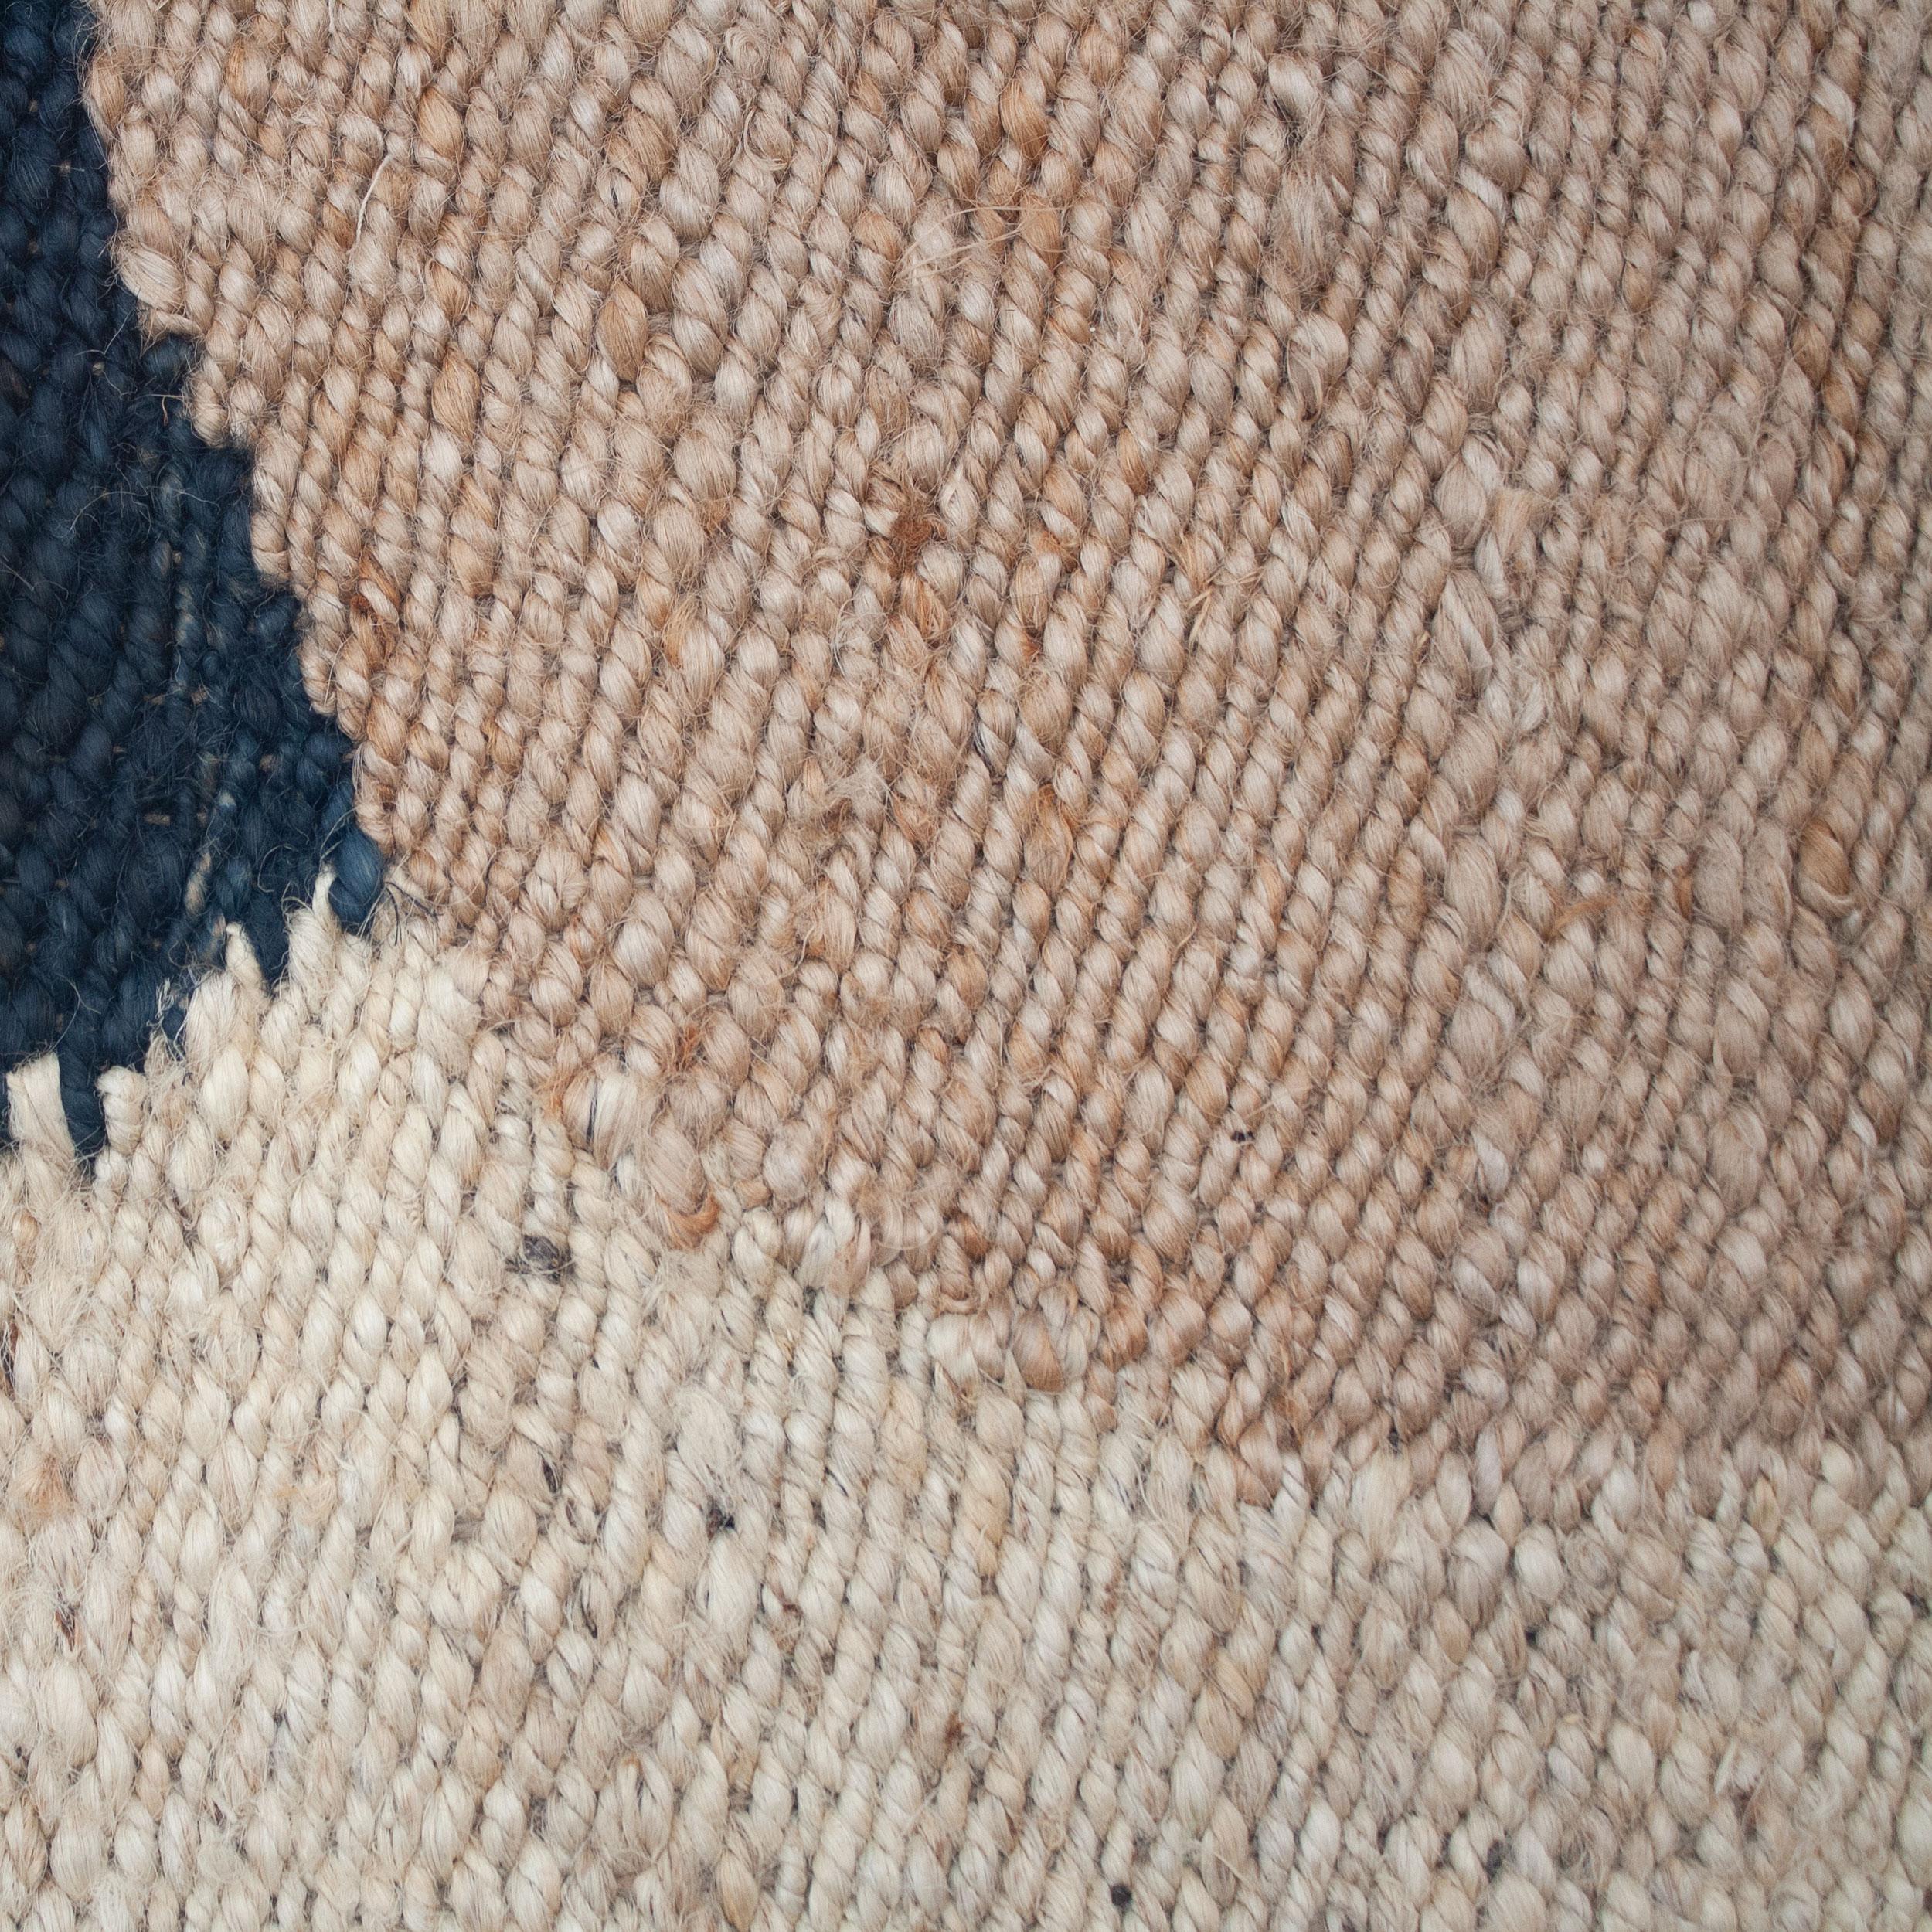 This jute rug has been ethically hand woven in the finest jute yarns by artisans in Rajasthan, India, using a traditional weaving technique which is native to this region.

The purchase of this handcrafted rug helps to support the artisans and